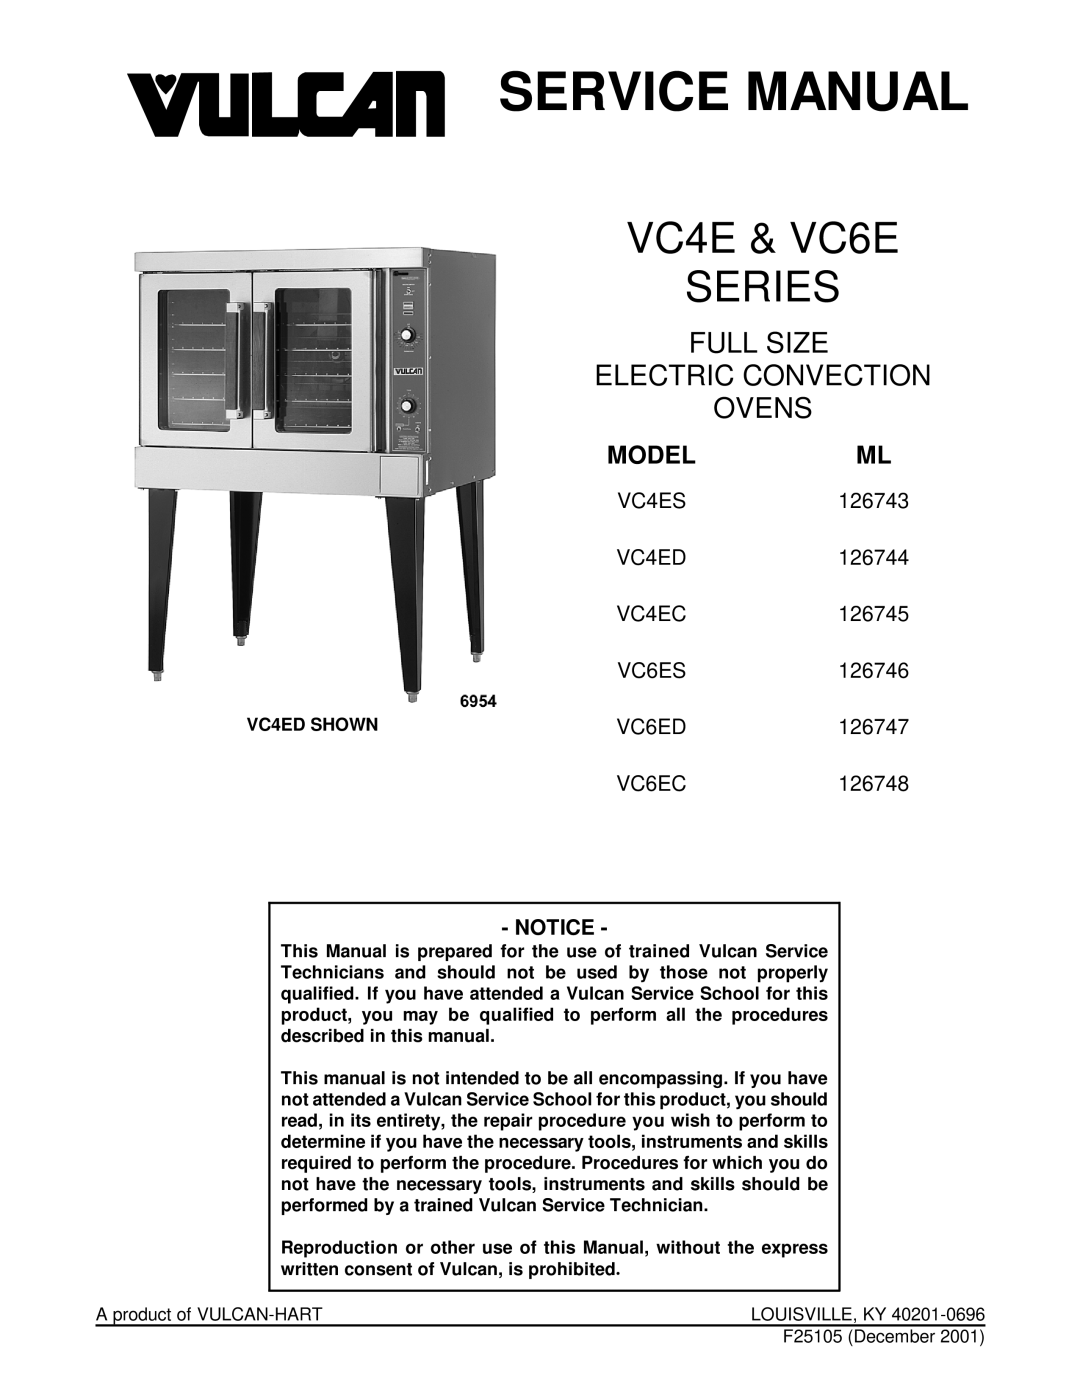 Vulcan-Hart VC6ED service manual Model, Notice, Service Manual, VC4E & VC6E SERIES, Full Size Electric Convection Ovens 